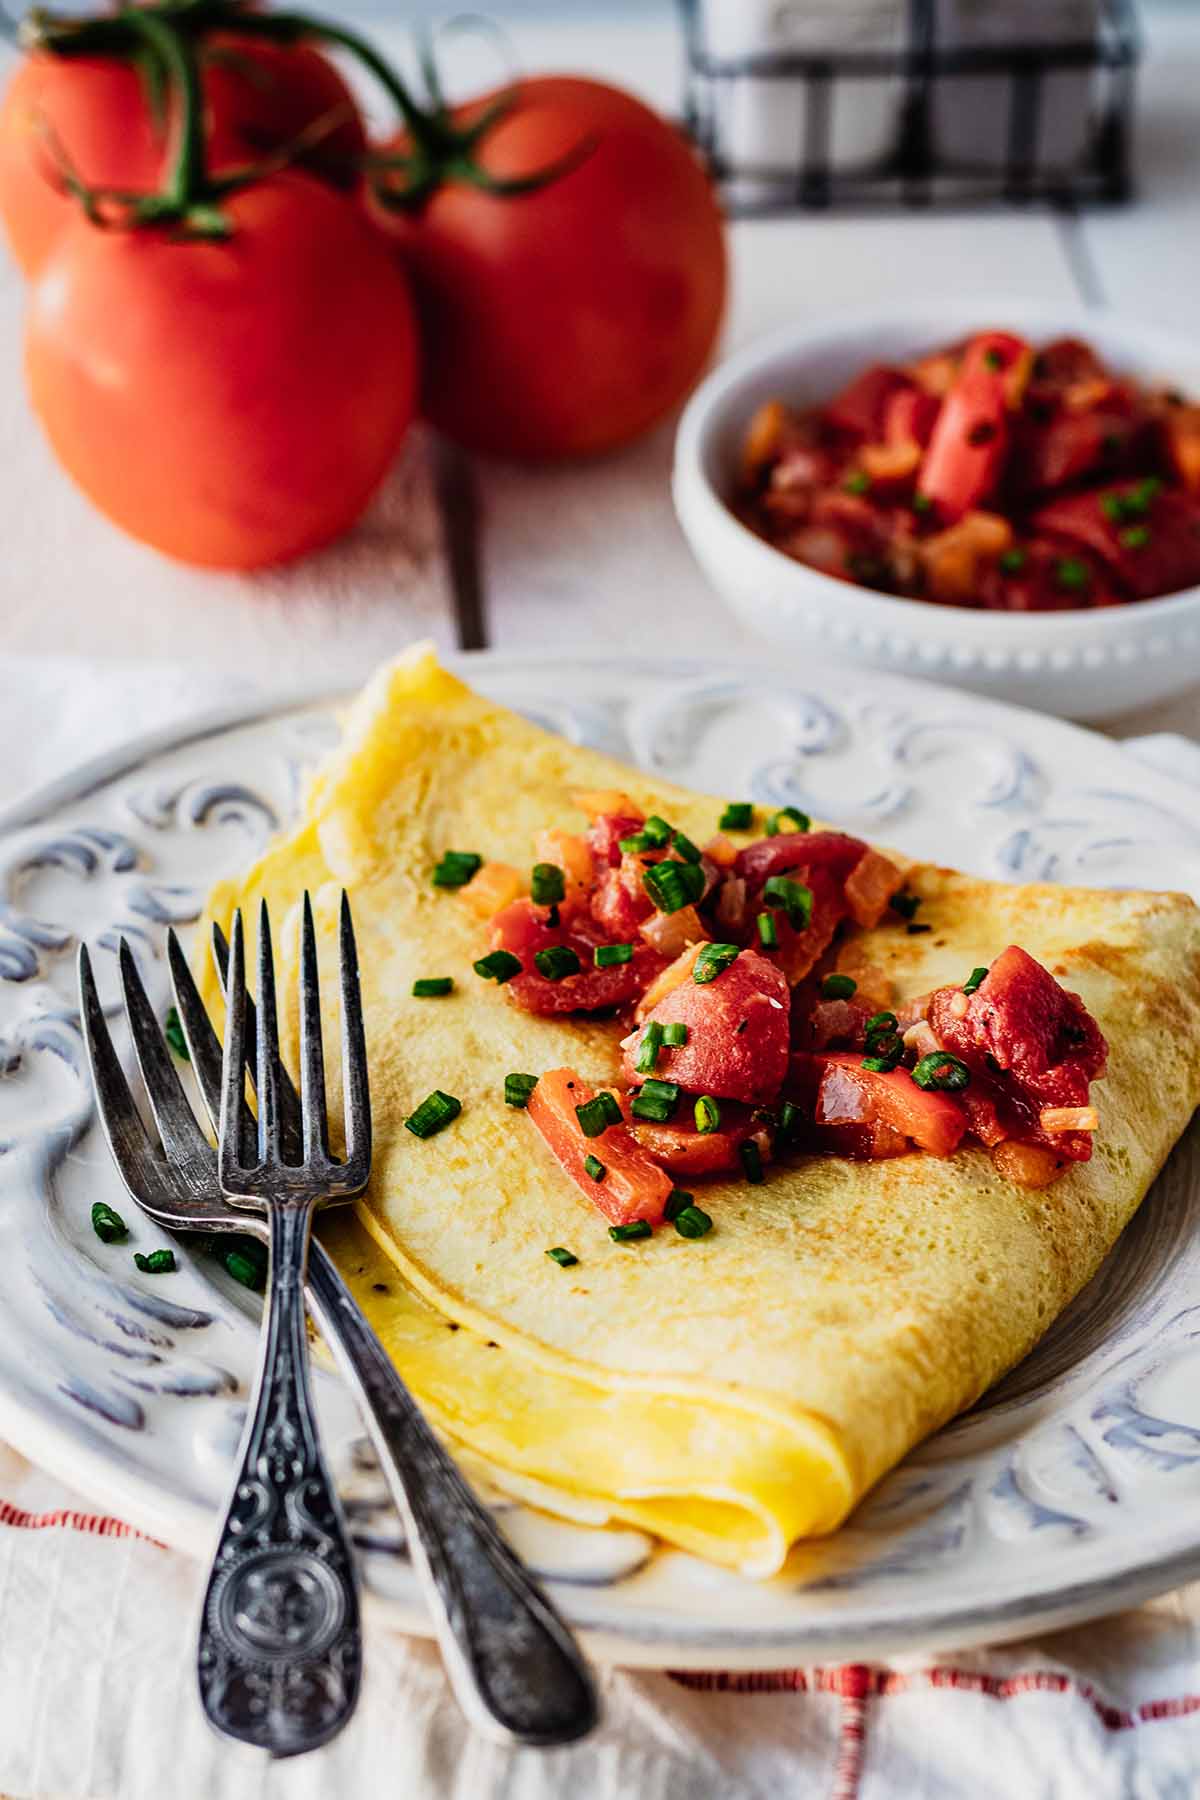 Folded omelette covered with tomato topping sitting on a white plate with two forks.